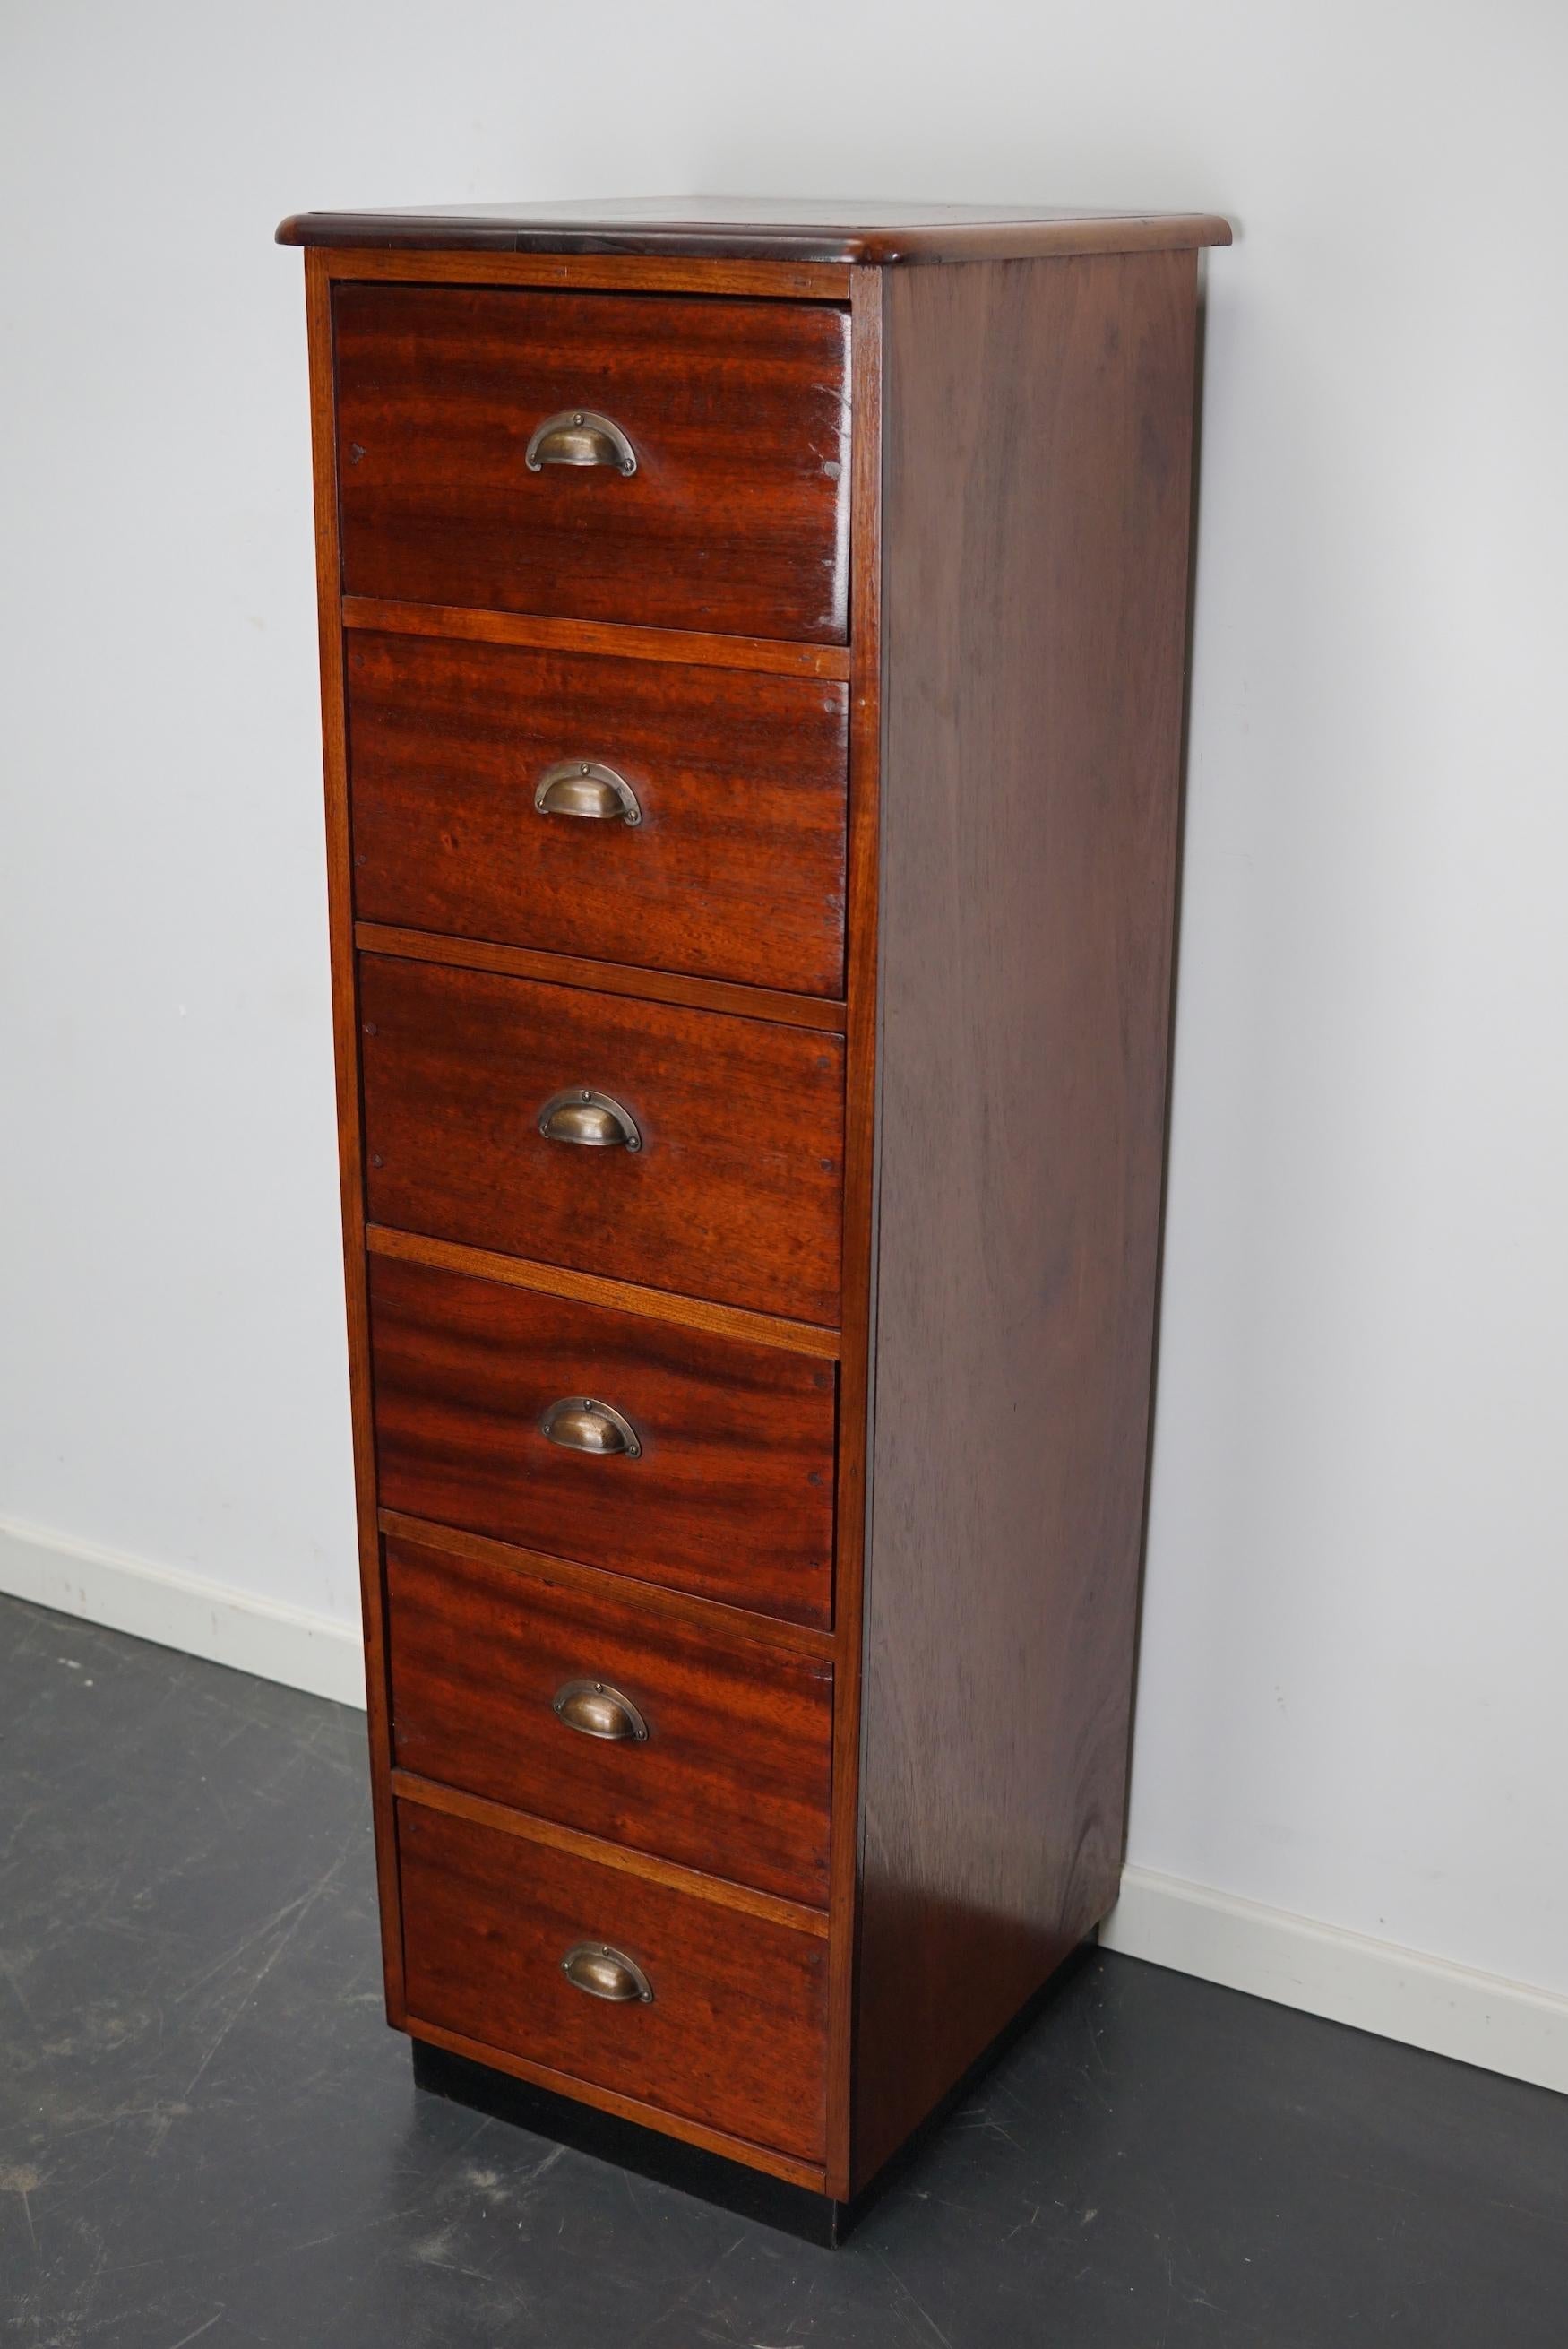 Dutch Industrial Mahogany Apothecary Cabinet, Mid-20th Century For Sale 13